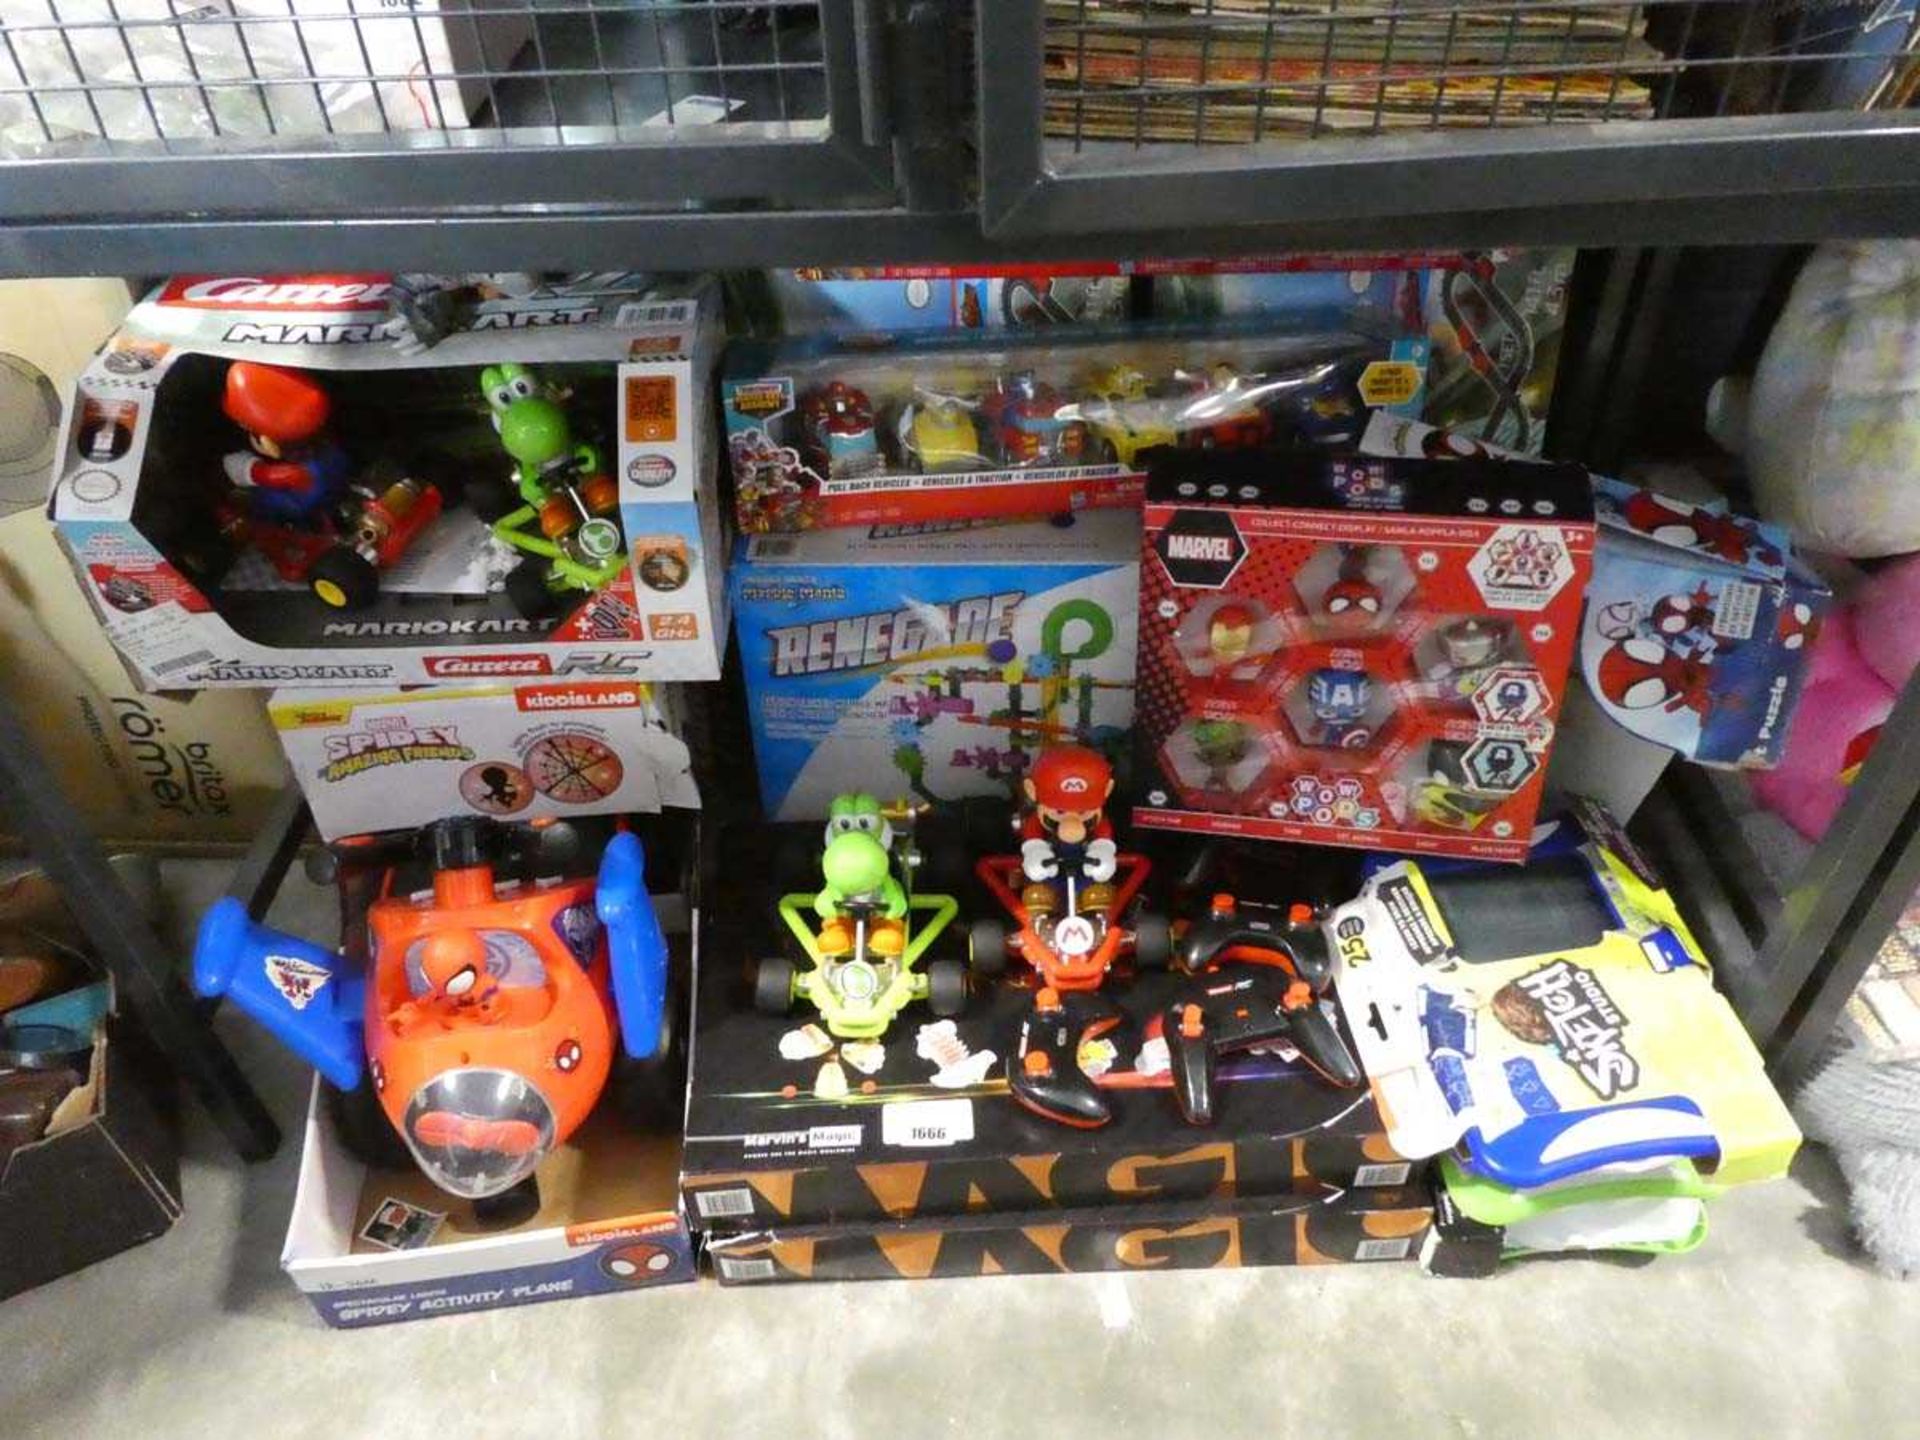 Undercage of various toys including Mario, Spiderman and Marvel